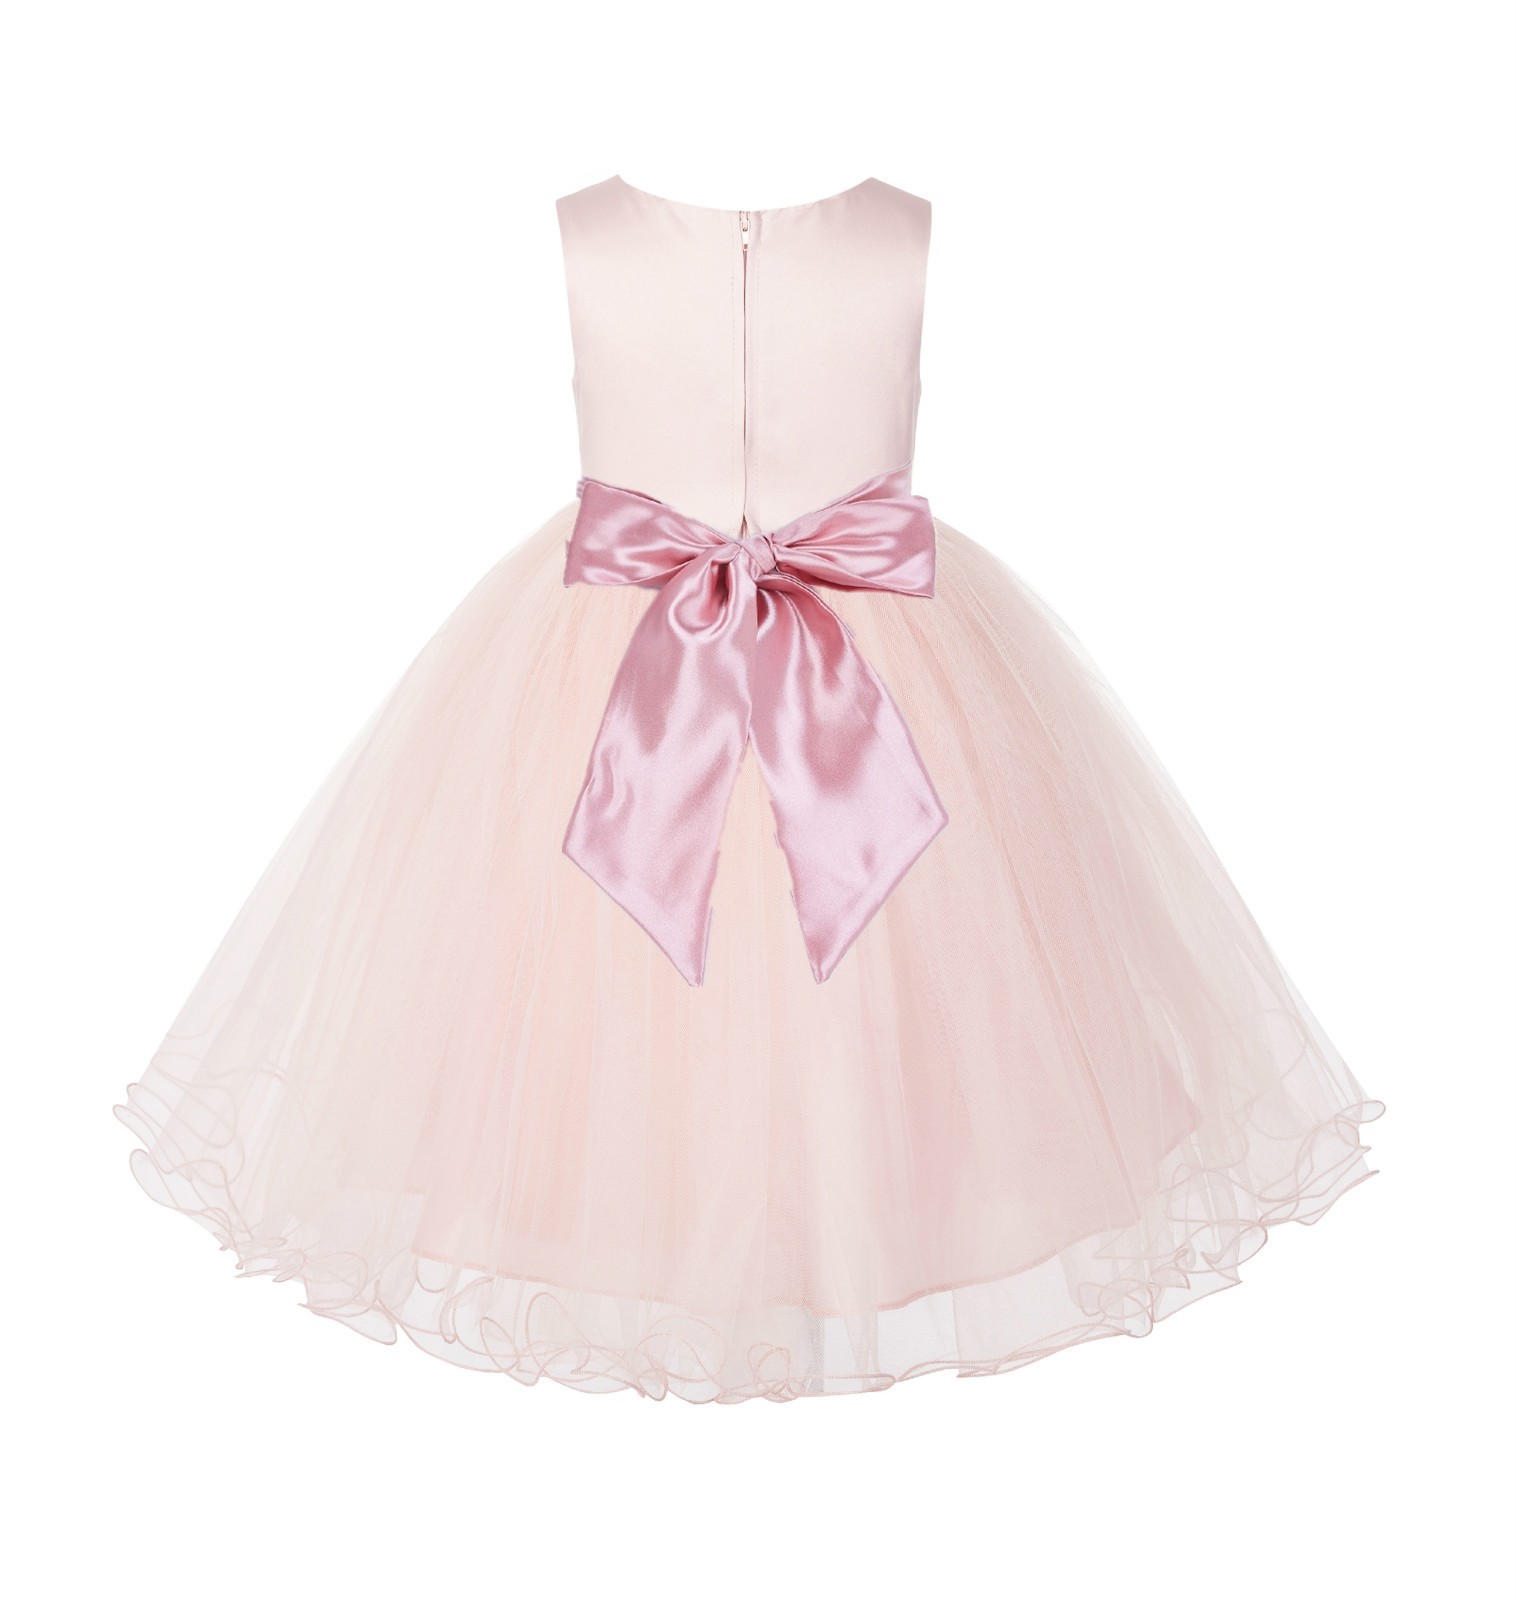 Blush Pink / Dusty rose Tulle Rattail Edge Flower Girl Dress Pageant ...